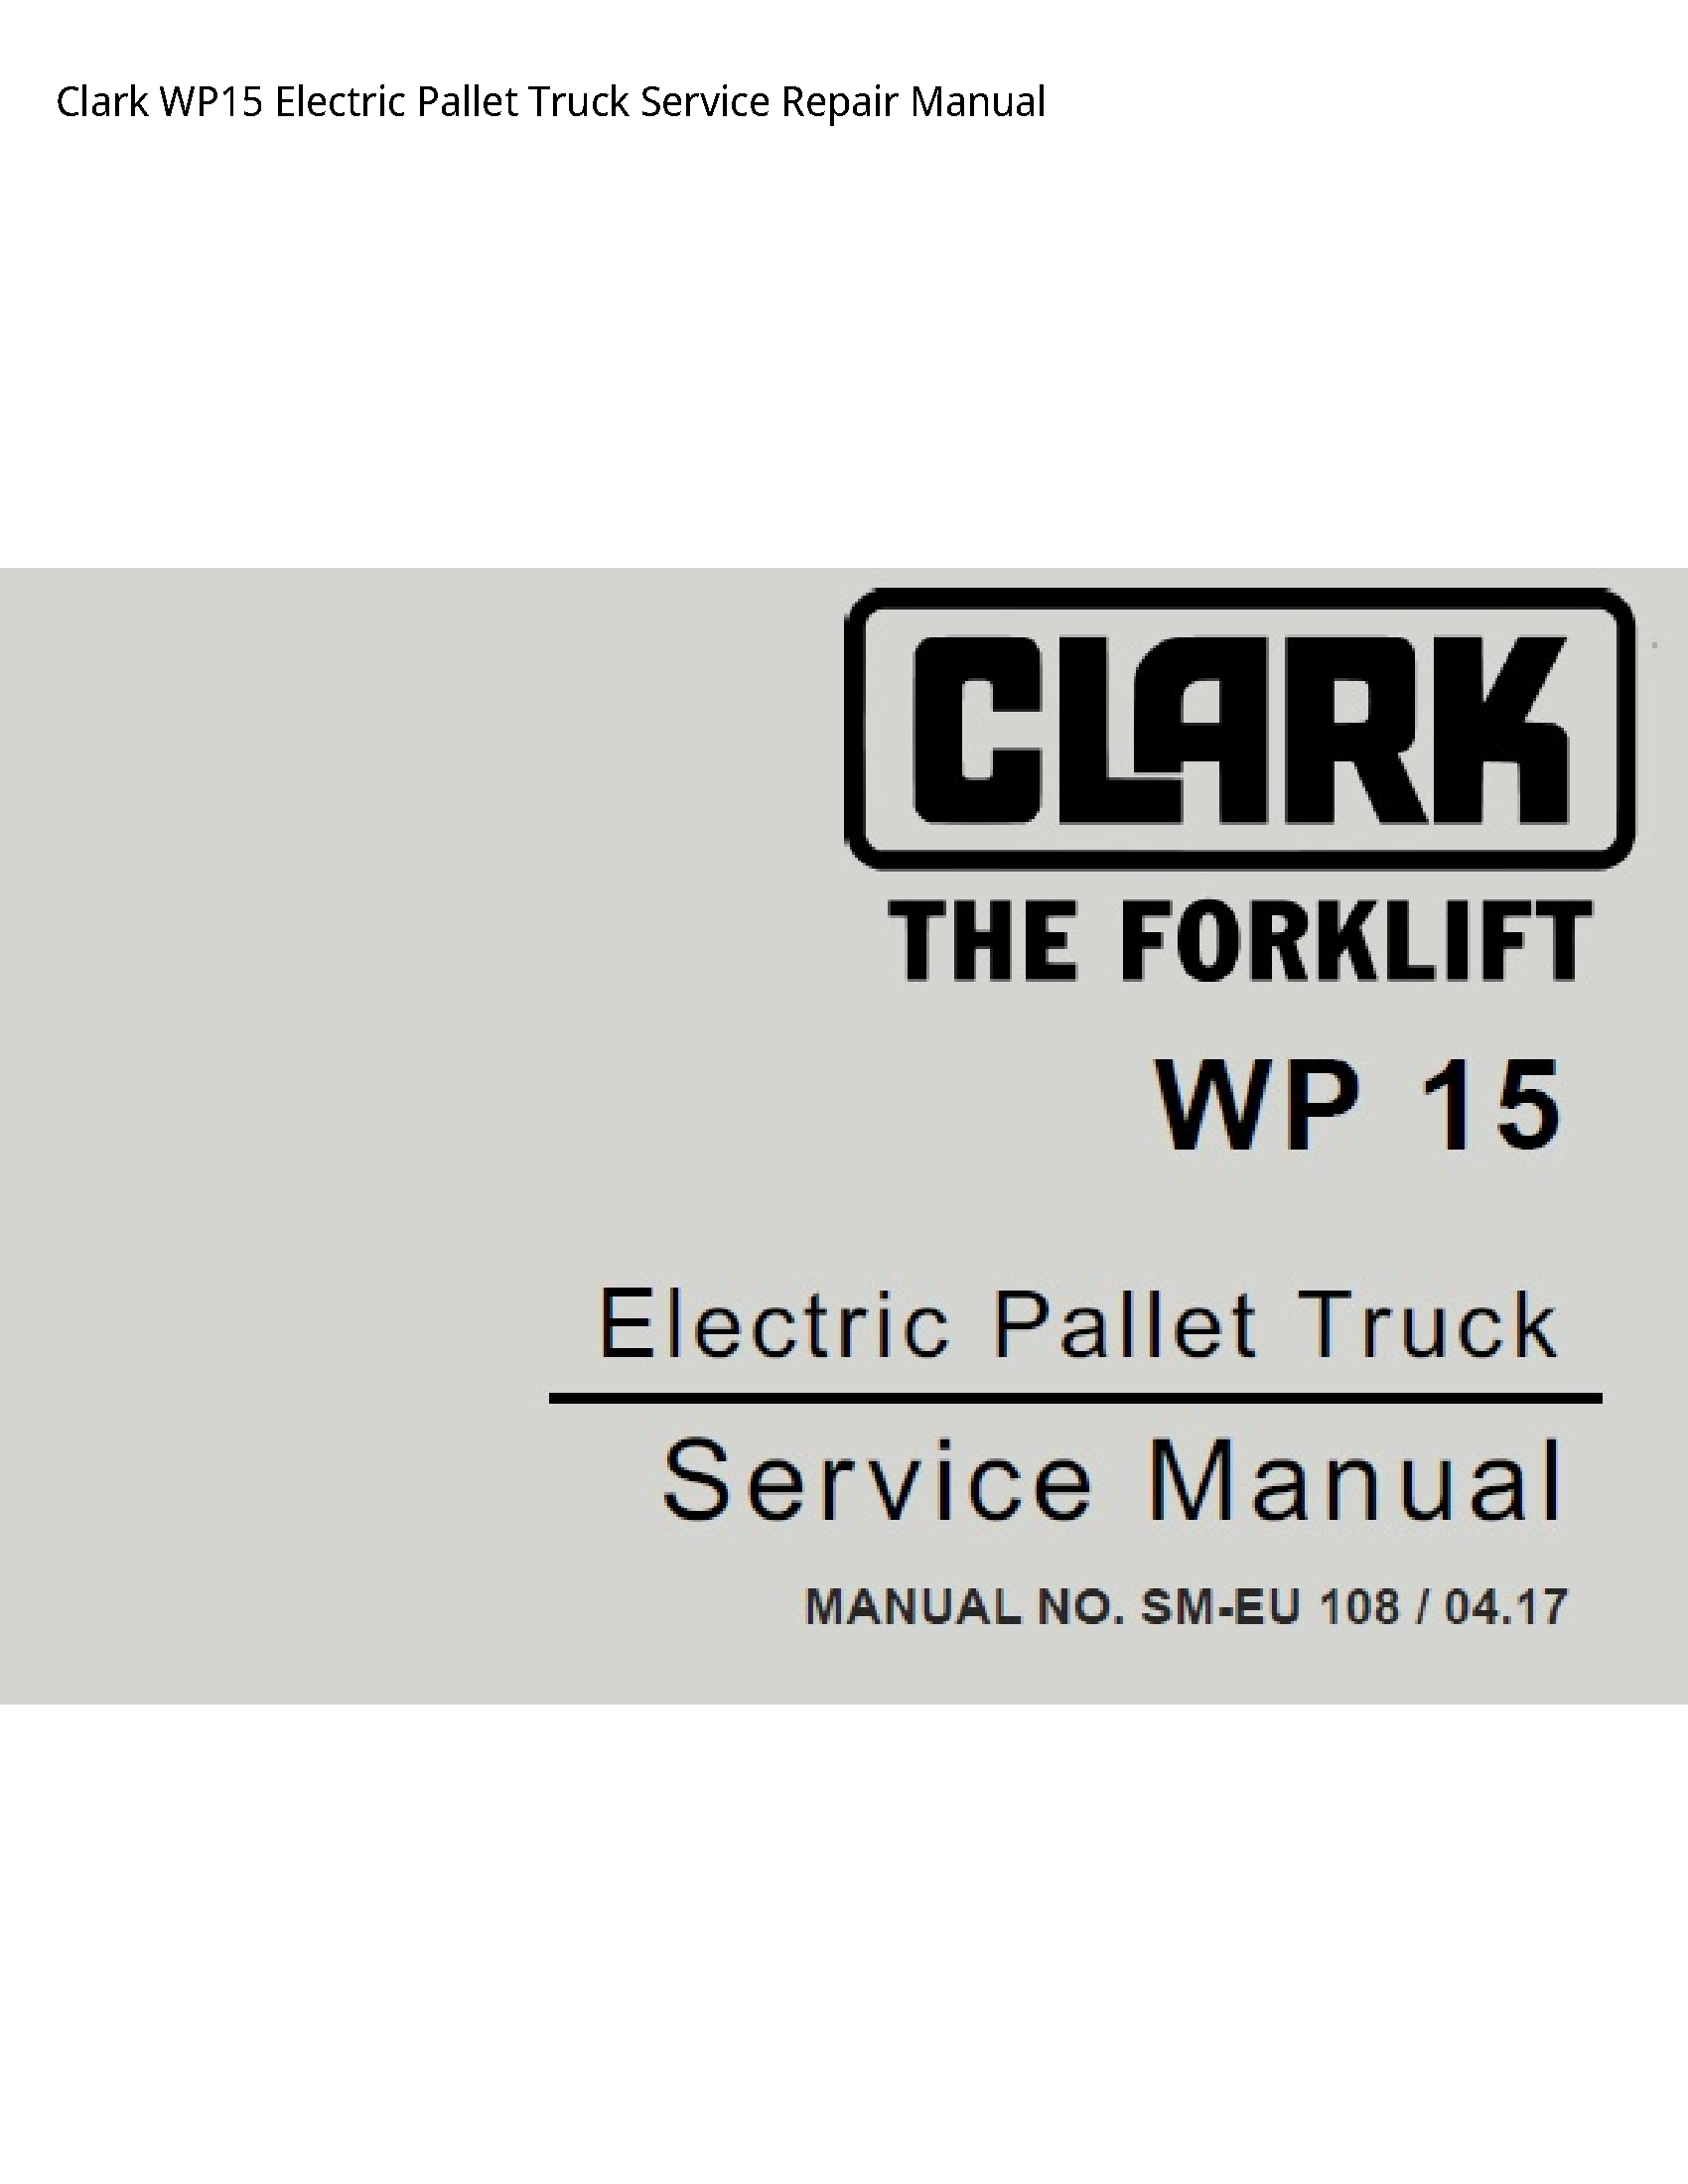 Clark WP15 Electric Pallet Truck manual